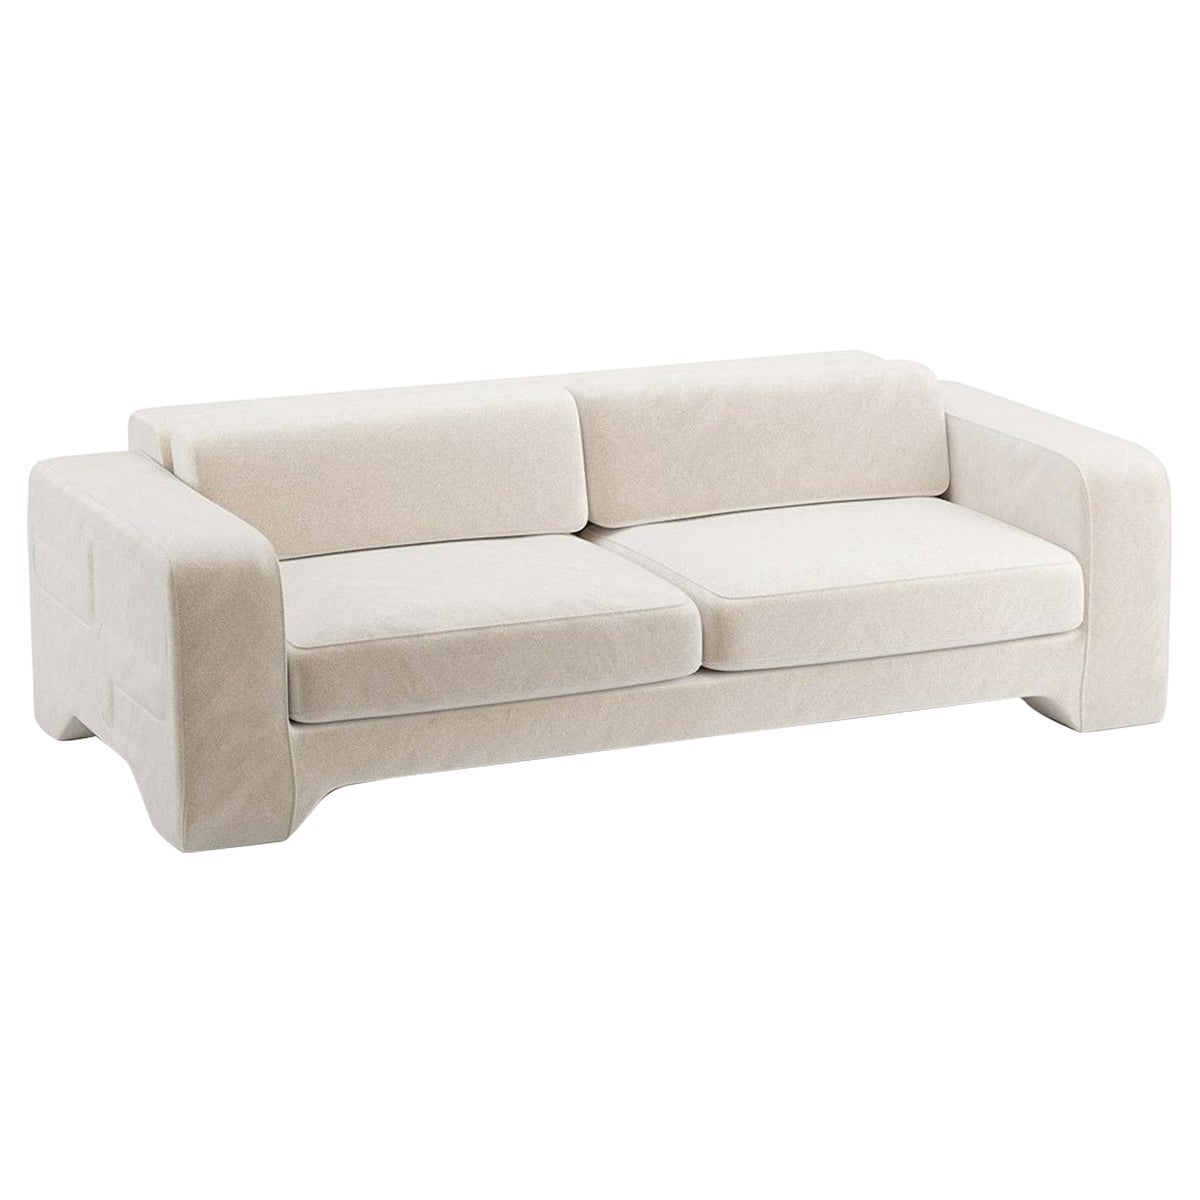 Popus Editions Giovanna 3 Seater Sofa in Egg Shell Off-White Como Velvet Fabric For Sale